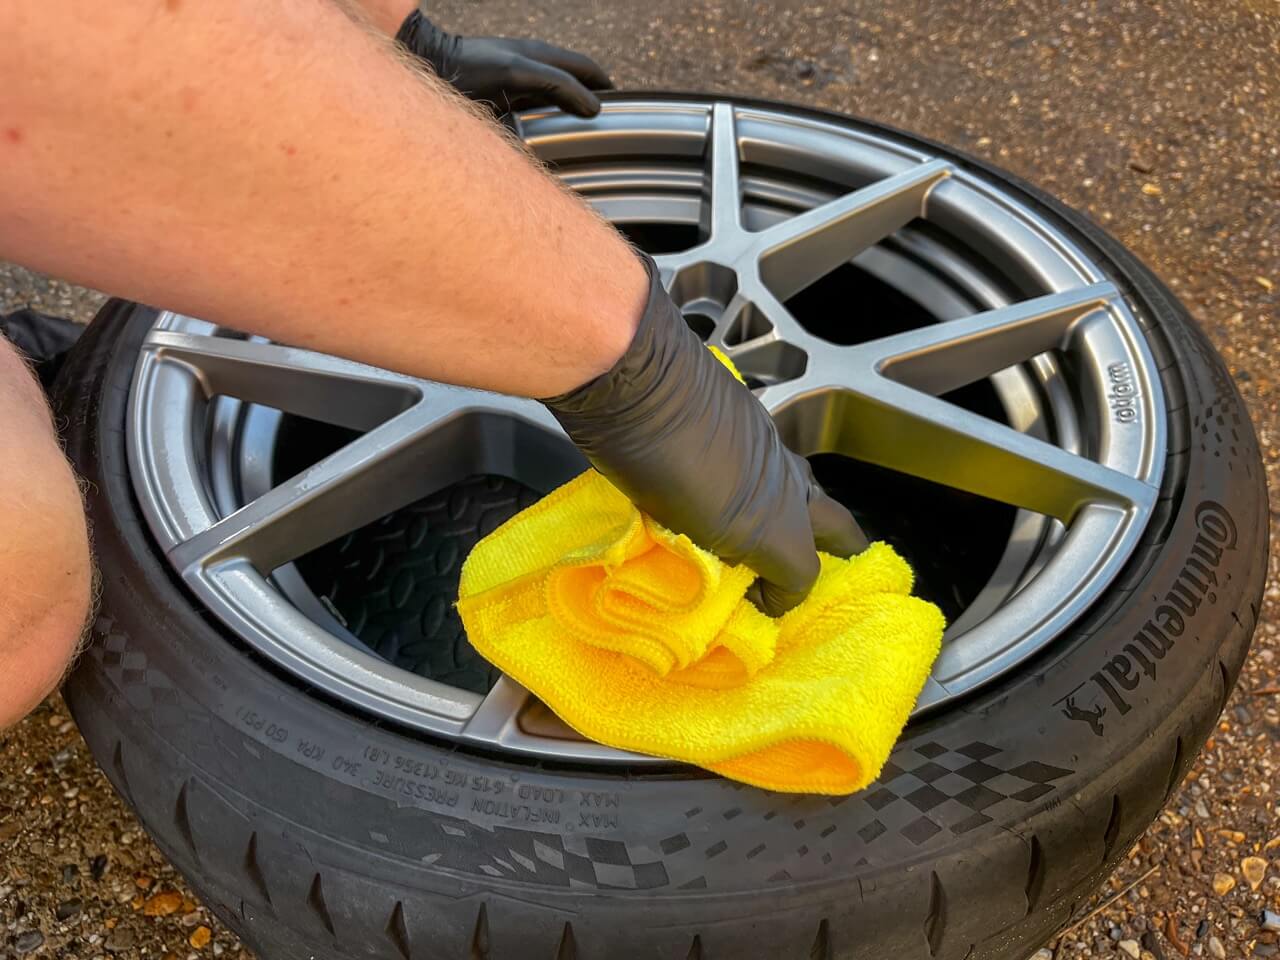 Buffing the alloy wheel to remove any excess coating with a yellow microfiber